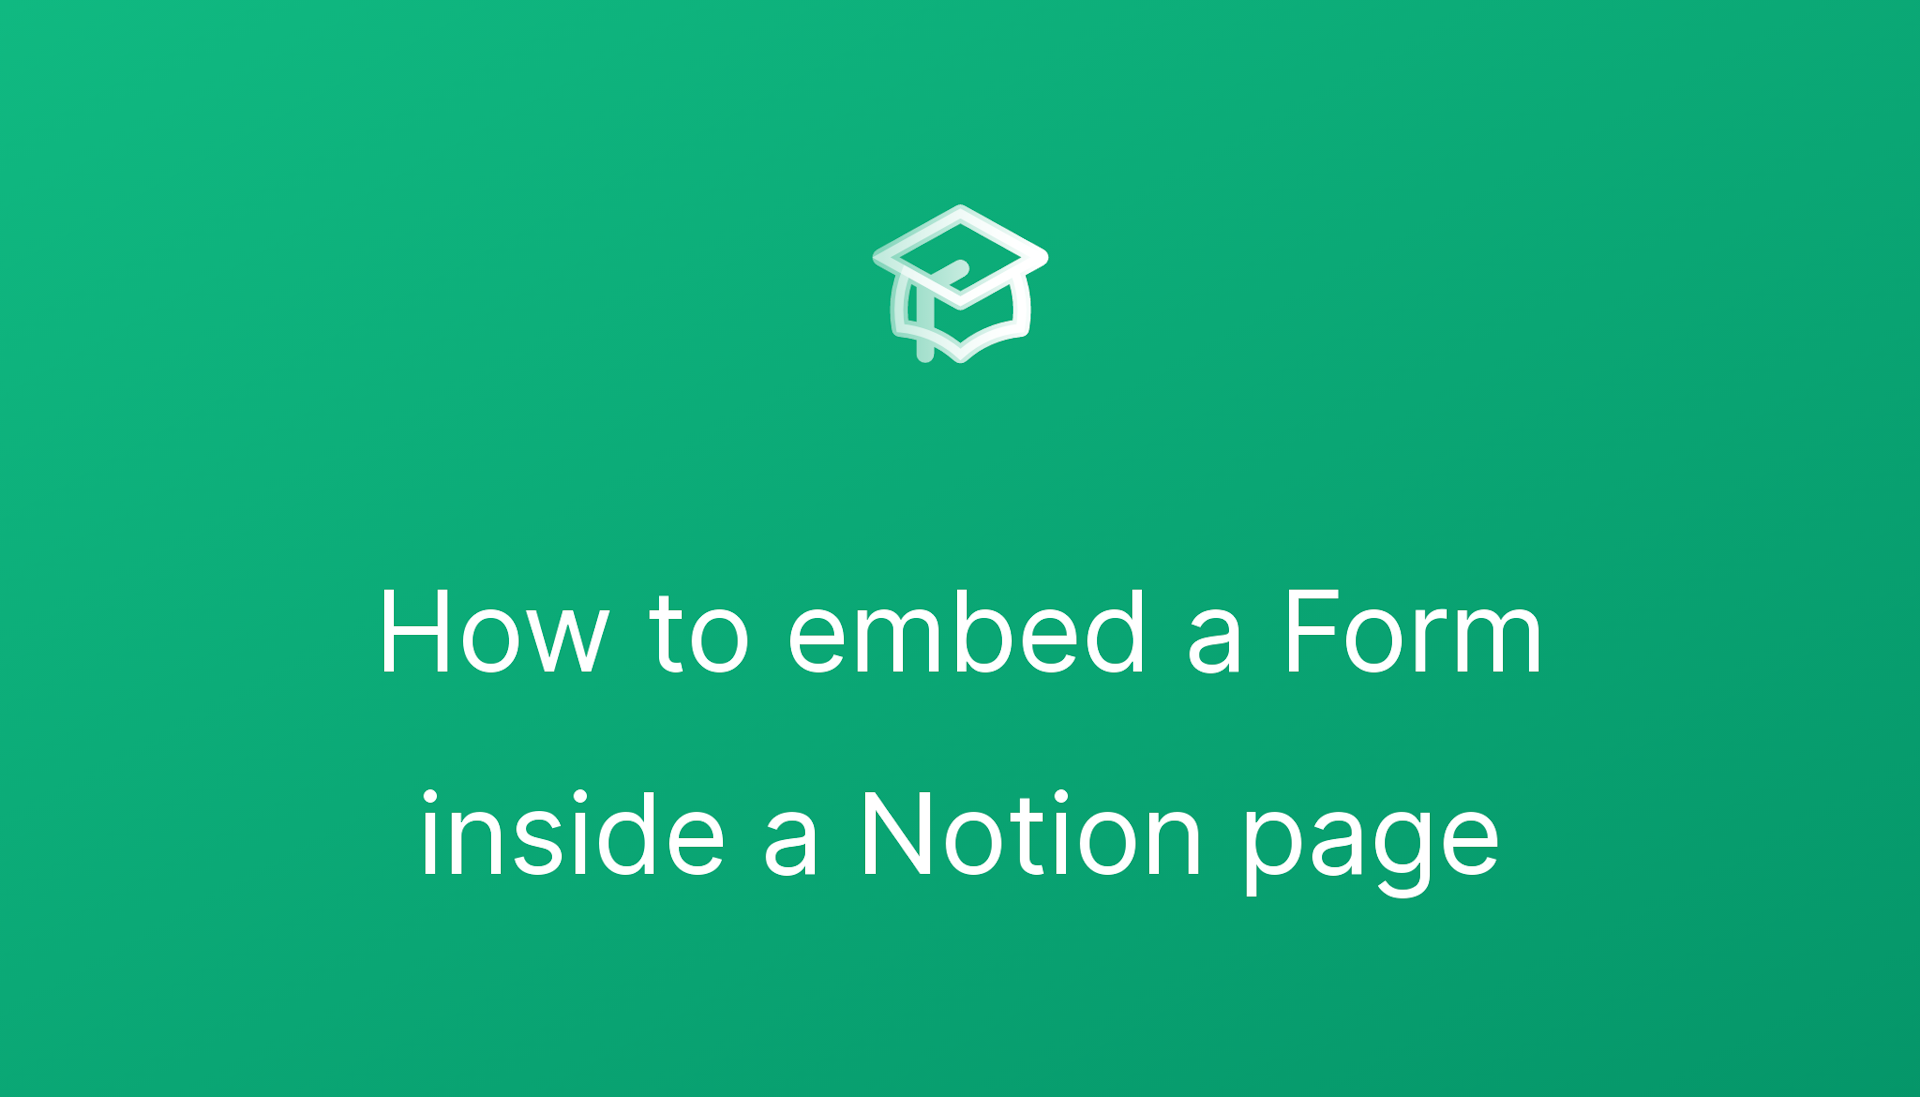 How to embed a Form inside a Notion page